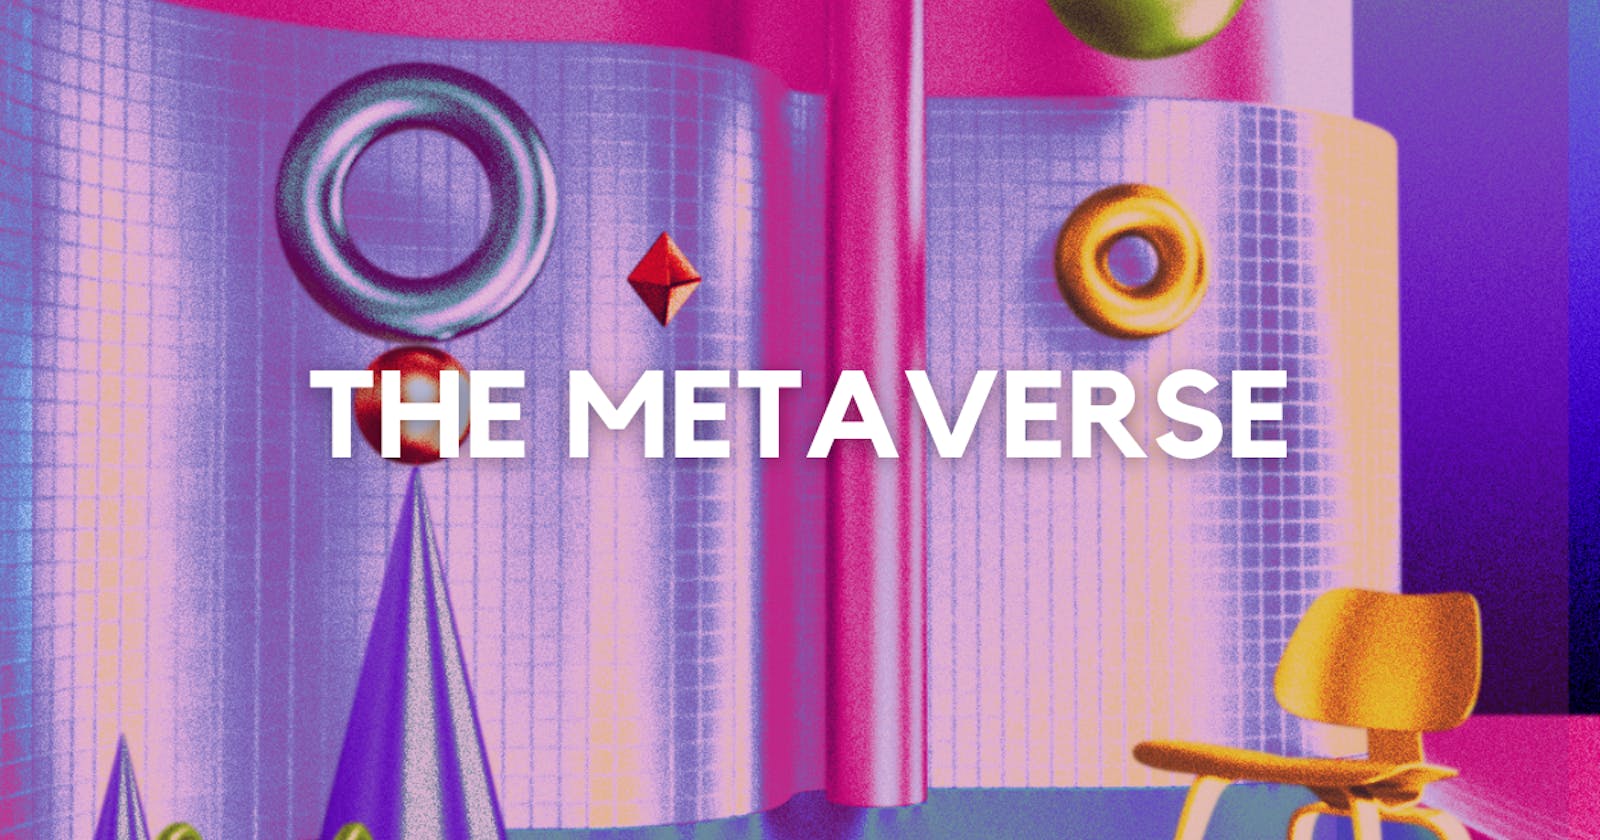 The metaverse: how blockchain is going to become mainstream